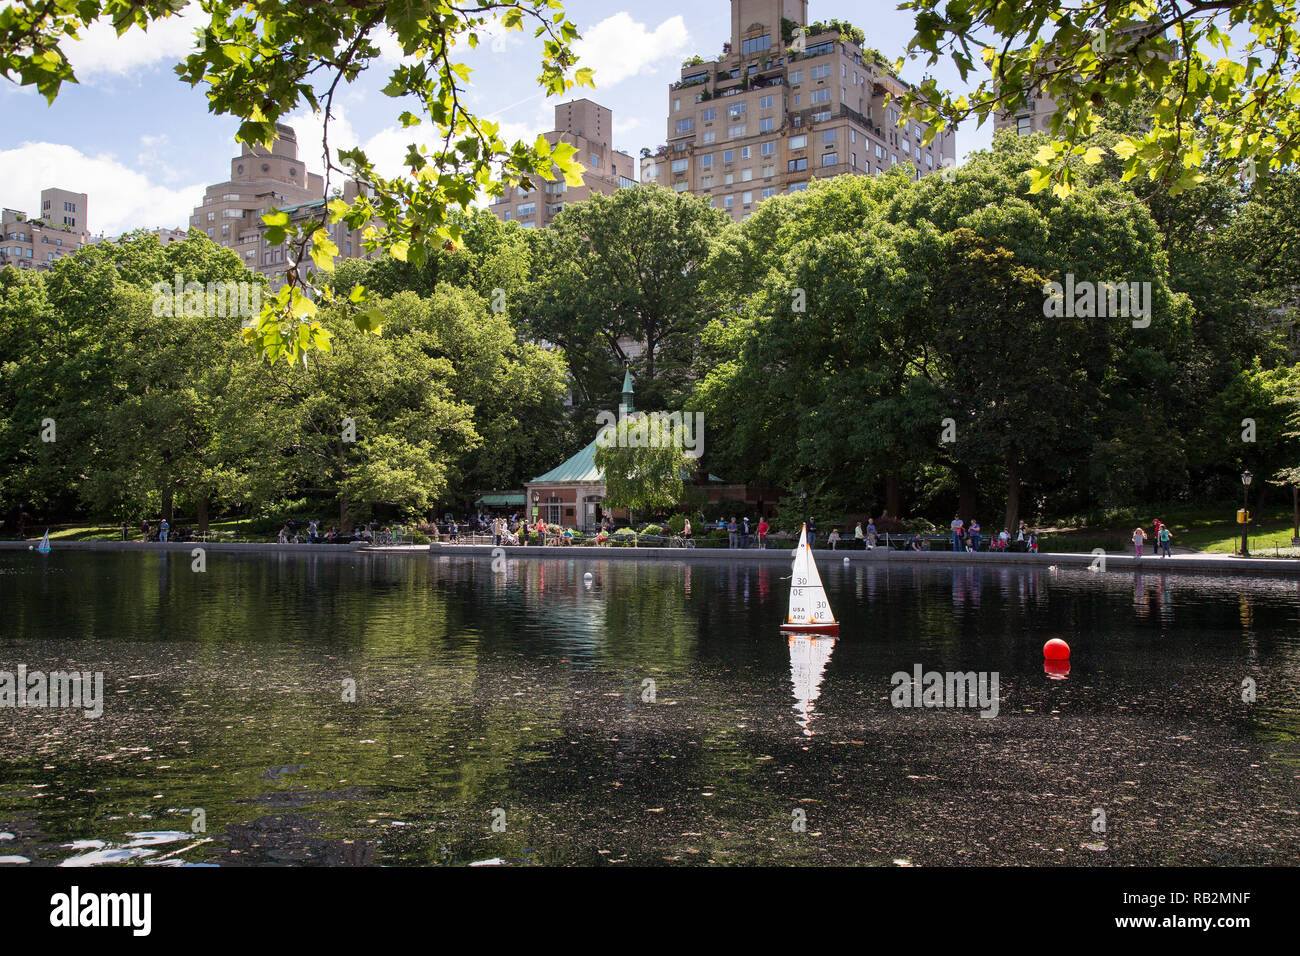 Model sailboat in the Conservatory Water in Central Park, New York. Stock Photo